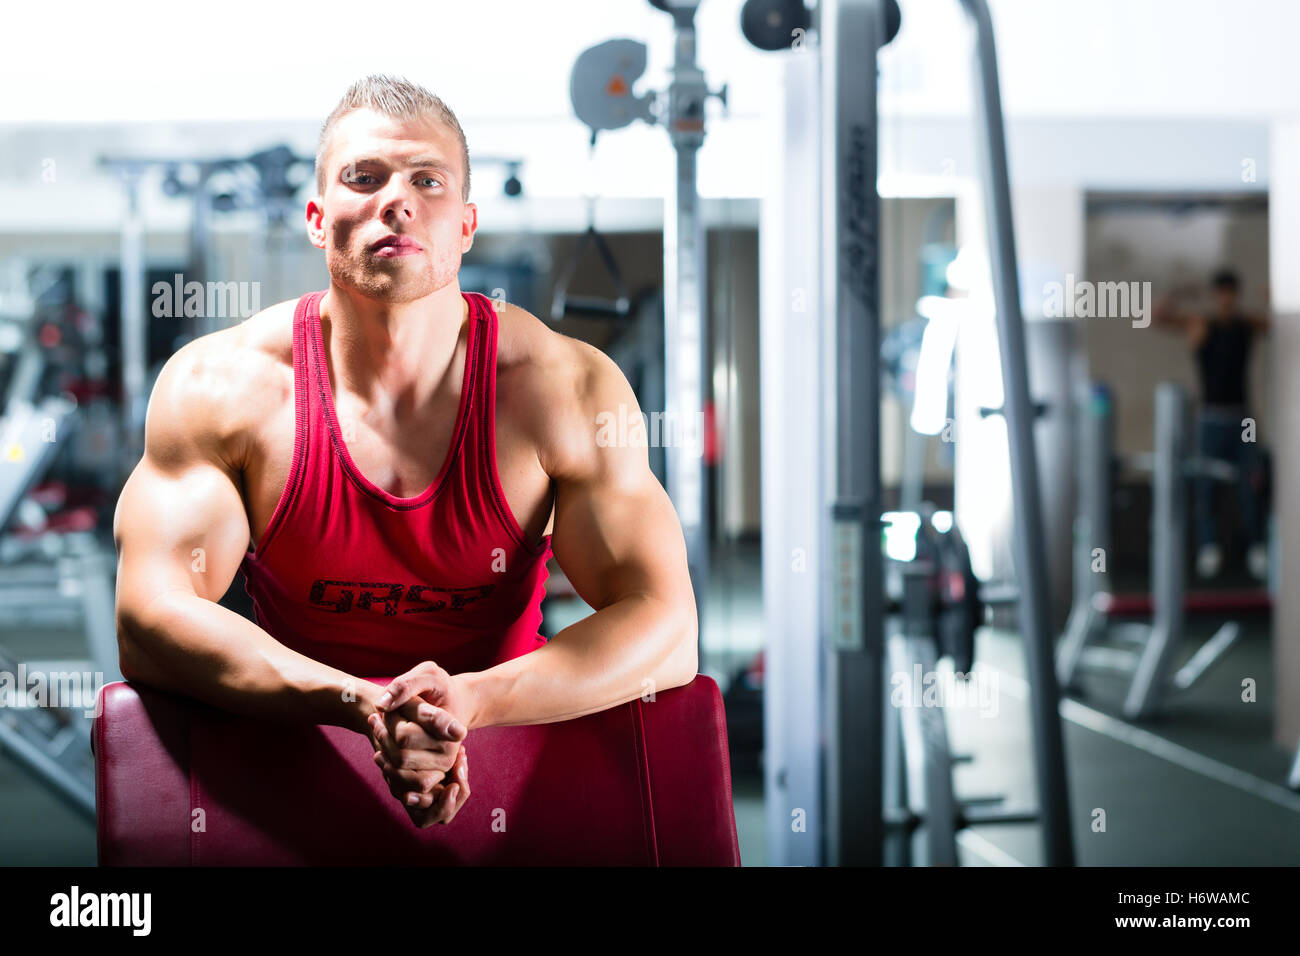 bodybuilders or trainer at the gym Stock Photo